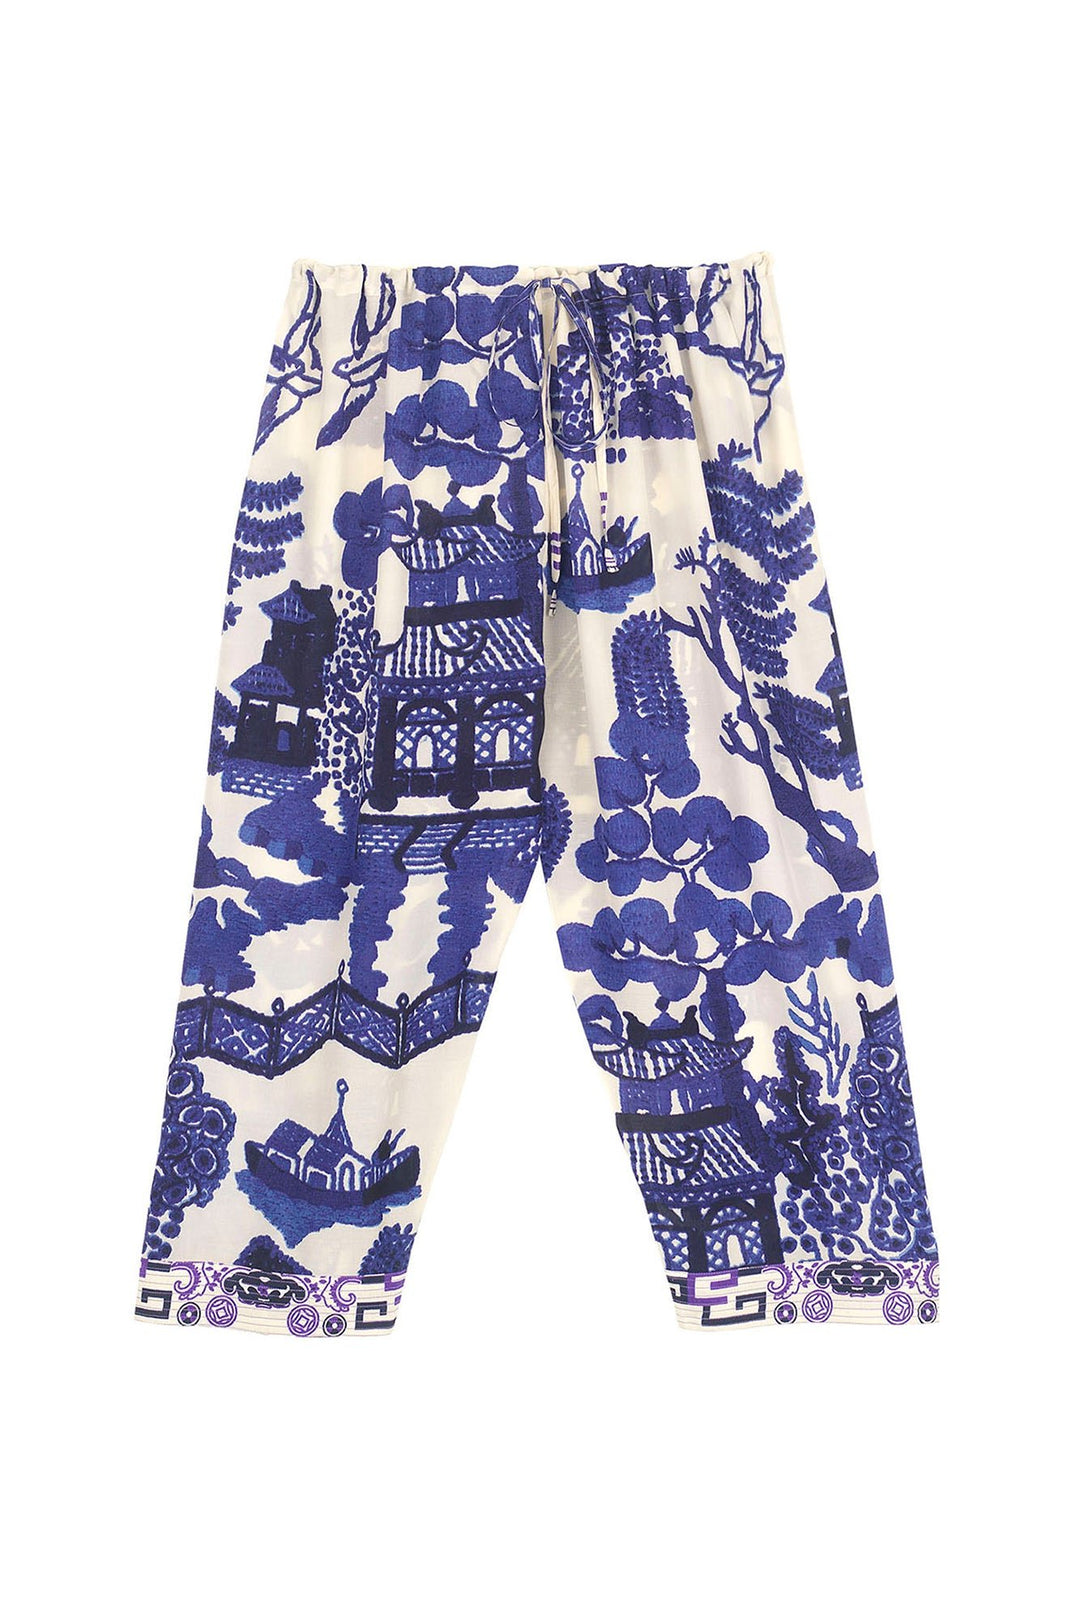 Giant Willow Blue Crepe Lounge Pants - One Hundred Stars